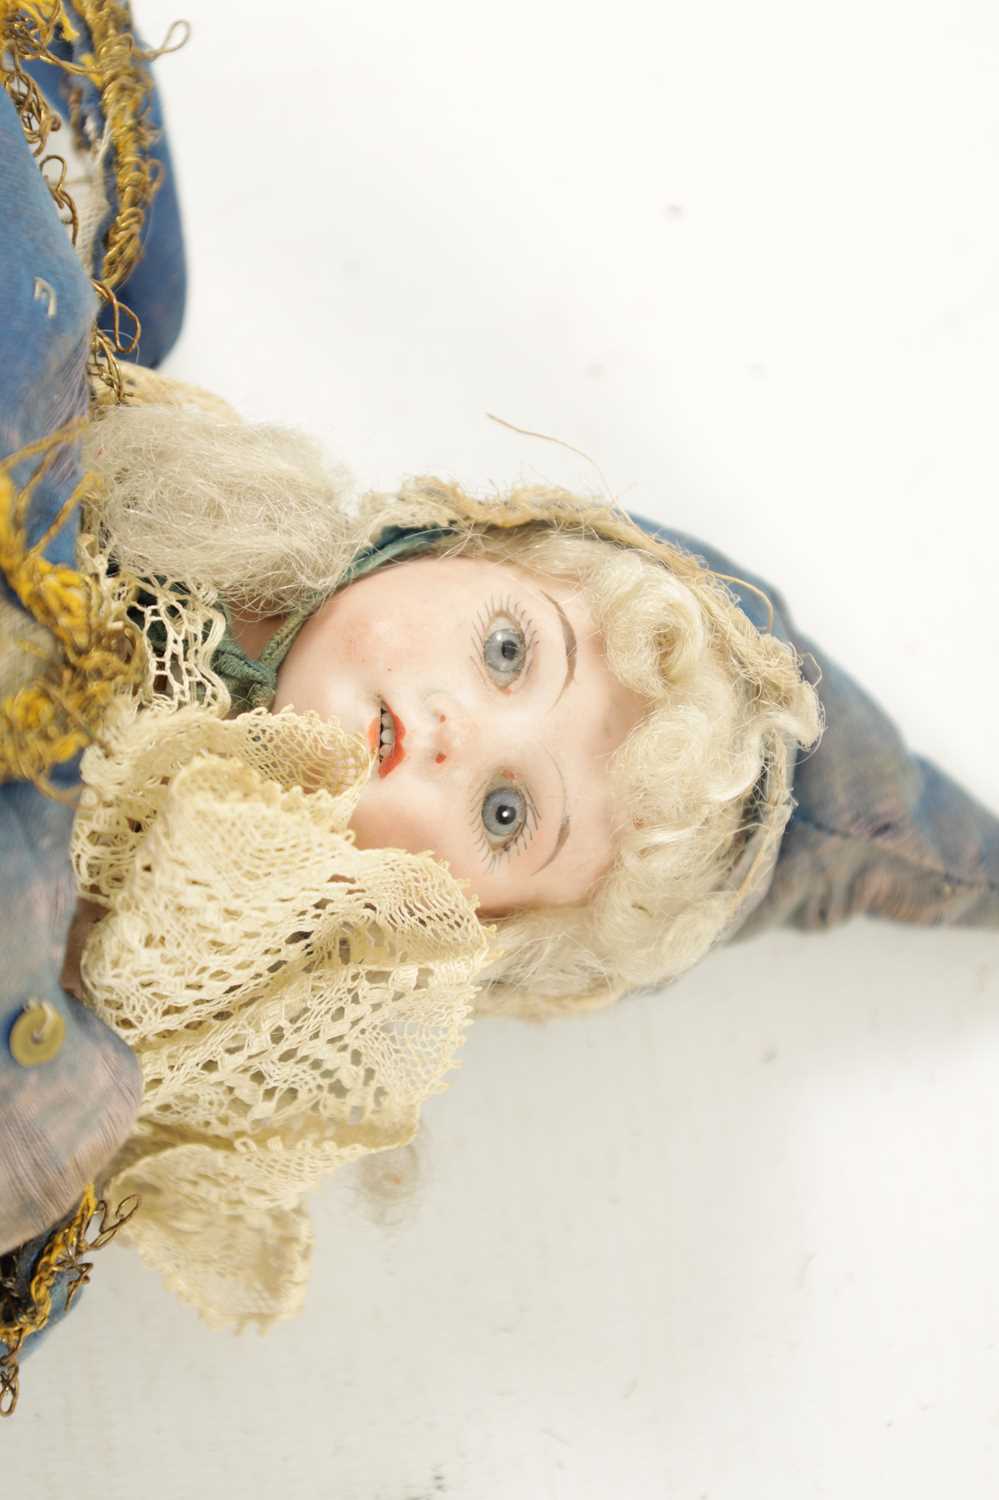 A LATE 19TH CENTURY BISQUE SOCKET HEAD DOLL / JESTER - Image 2 of 5